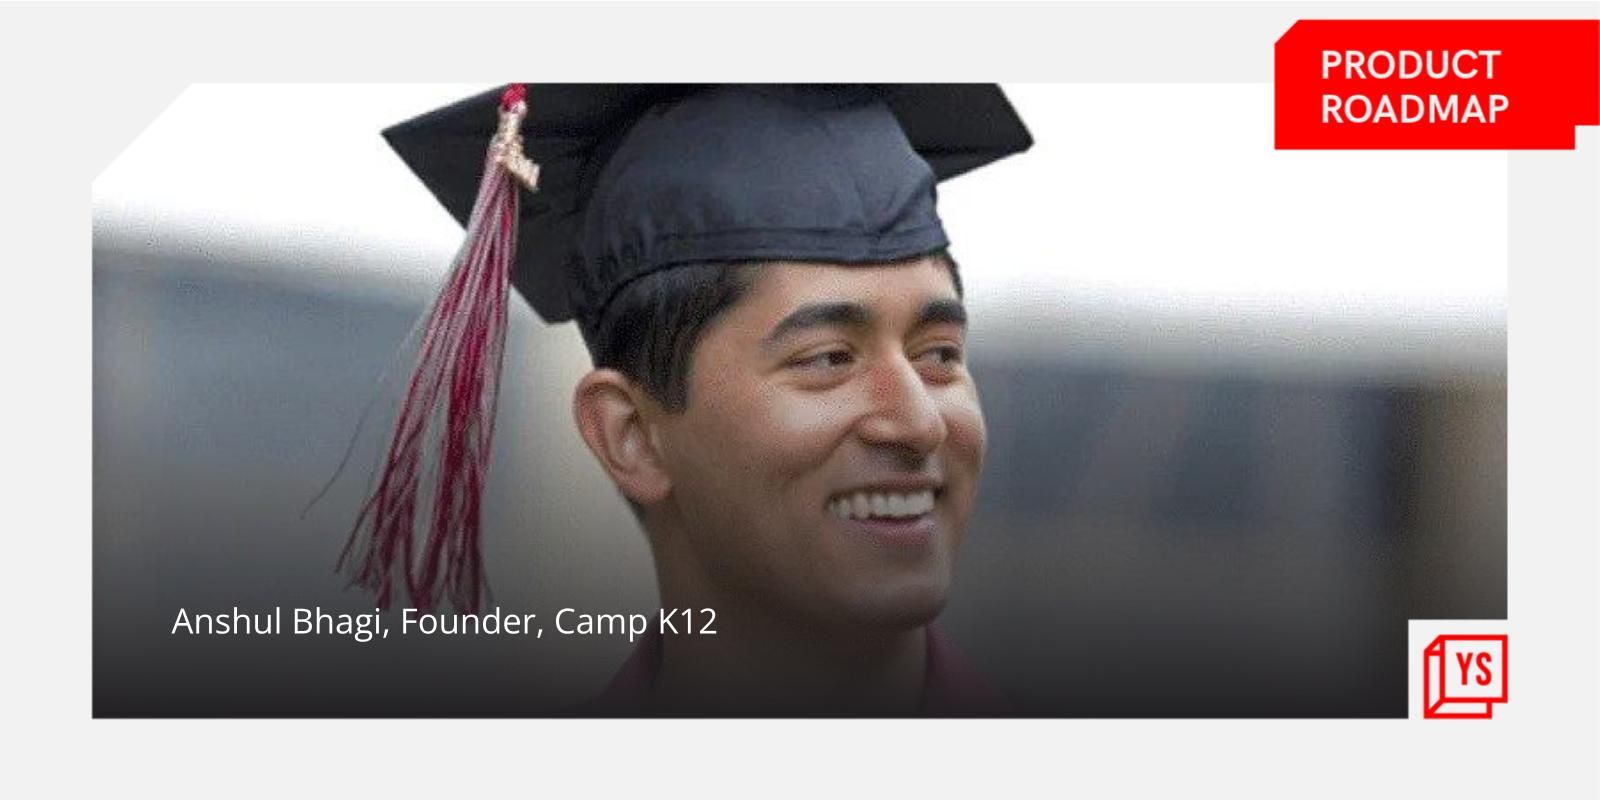 [Product Roadmap] From bootcamps to deep tech building, Camp K12 has evolved to make coding fun for kids